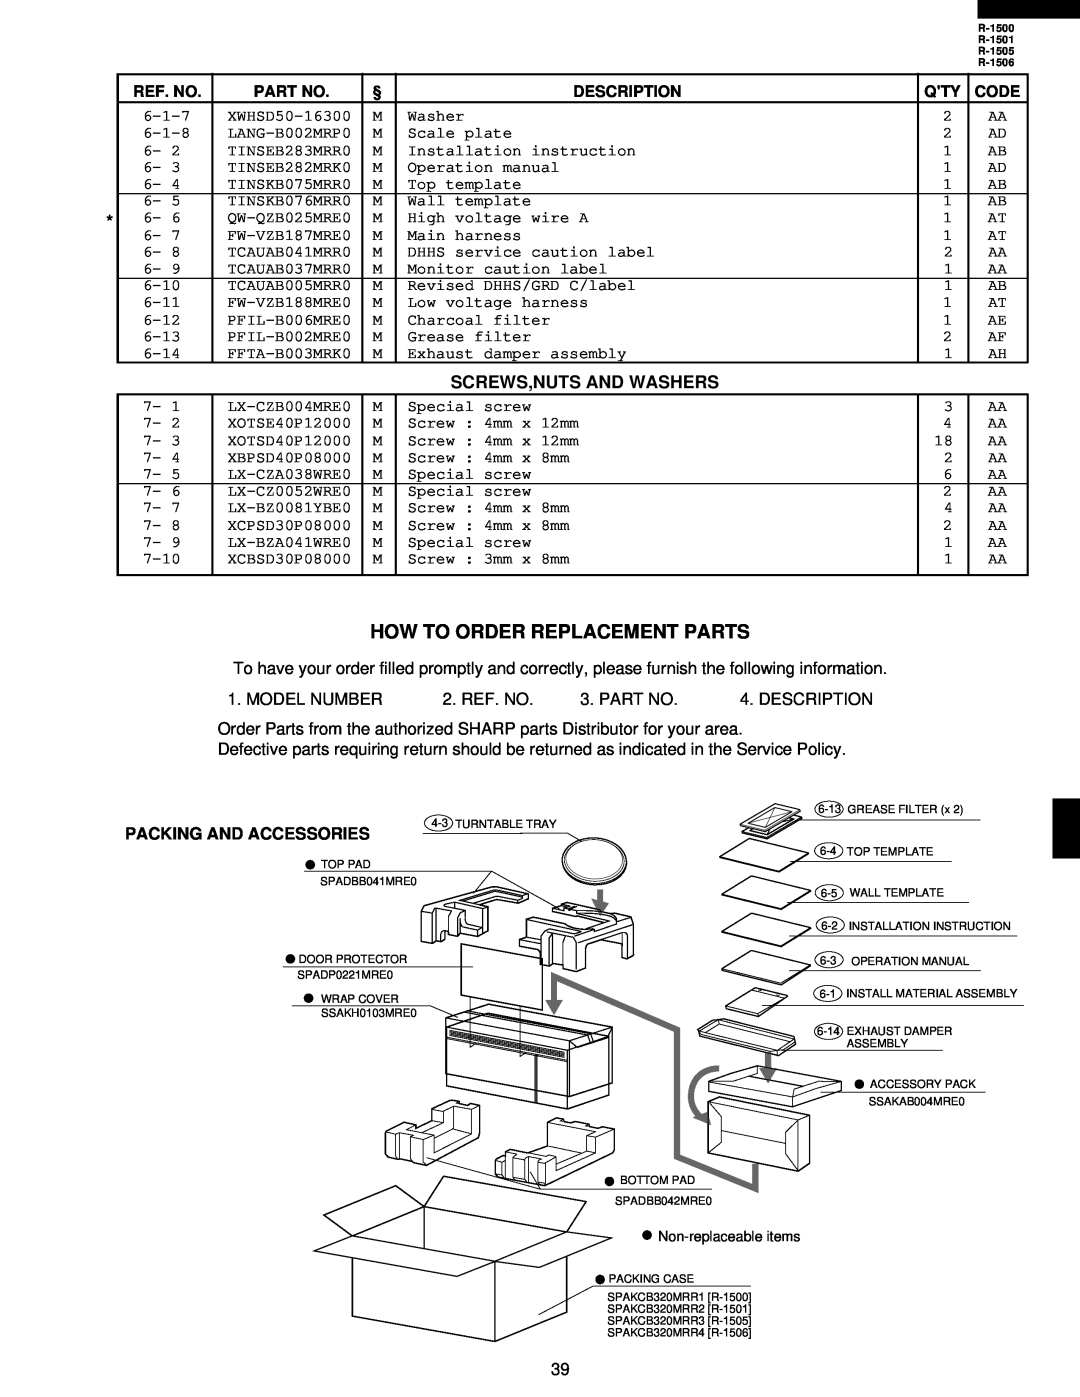 Sharp R-1505 How To Order Replacement Parts, Screws,Nuts And Washers, Packing And Accessories, Ref. No, Description, Code 